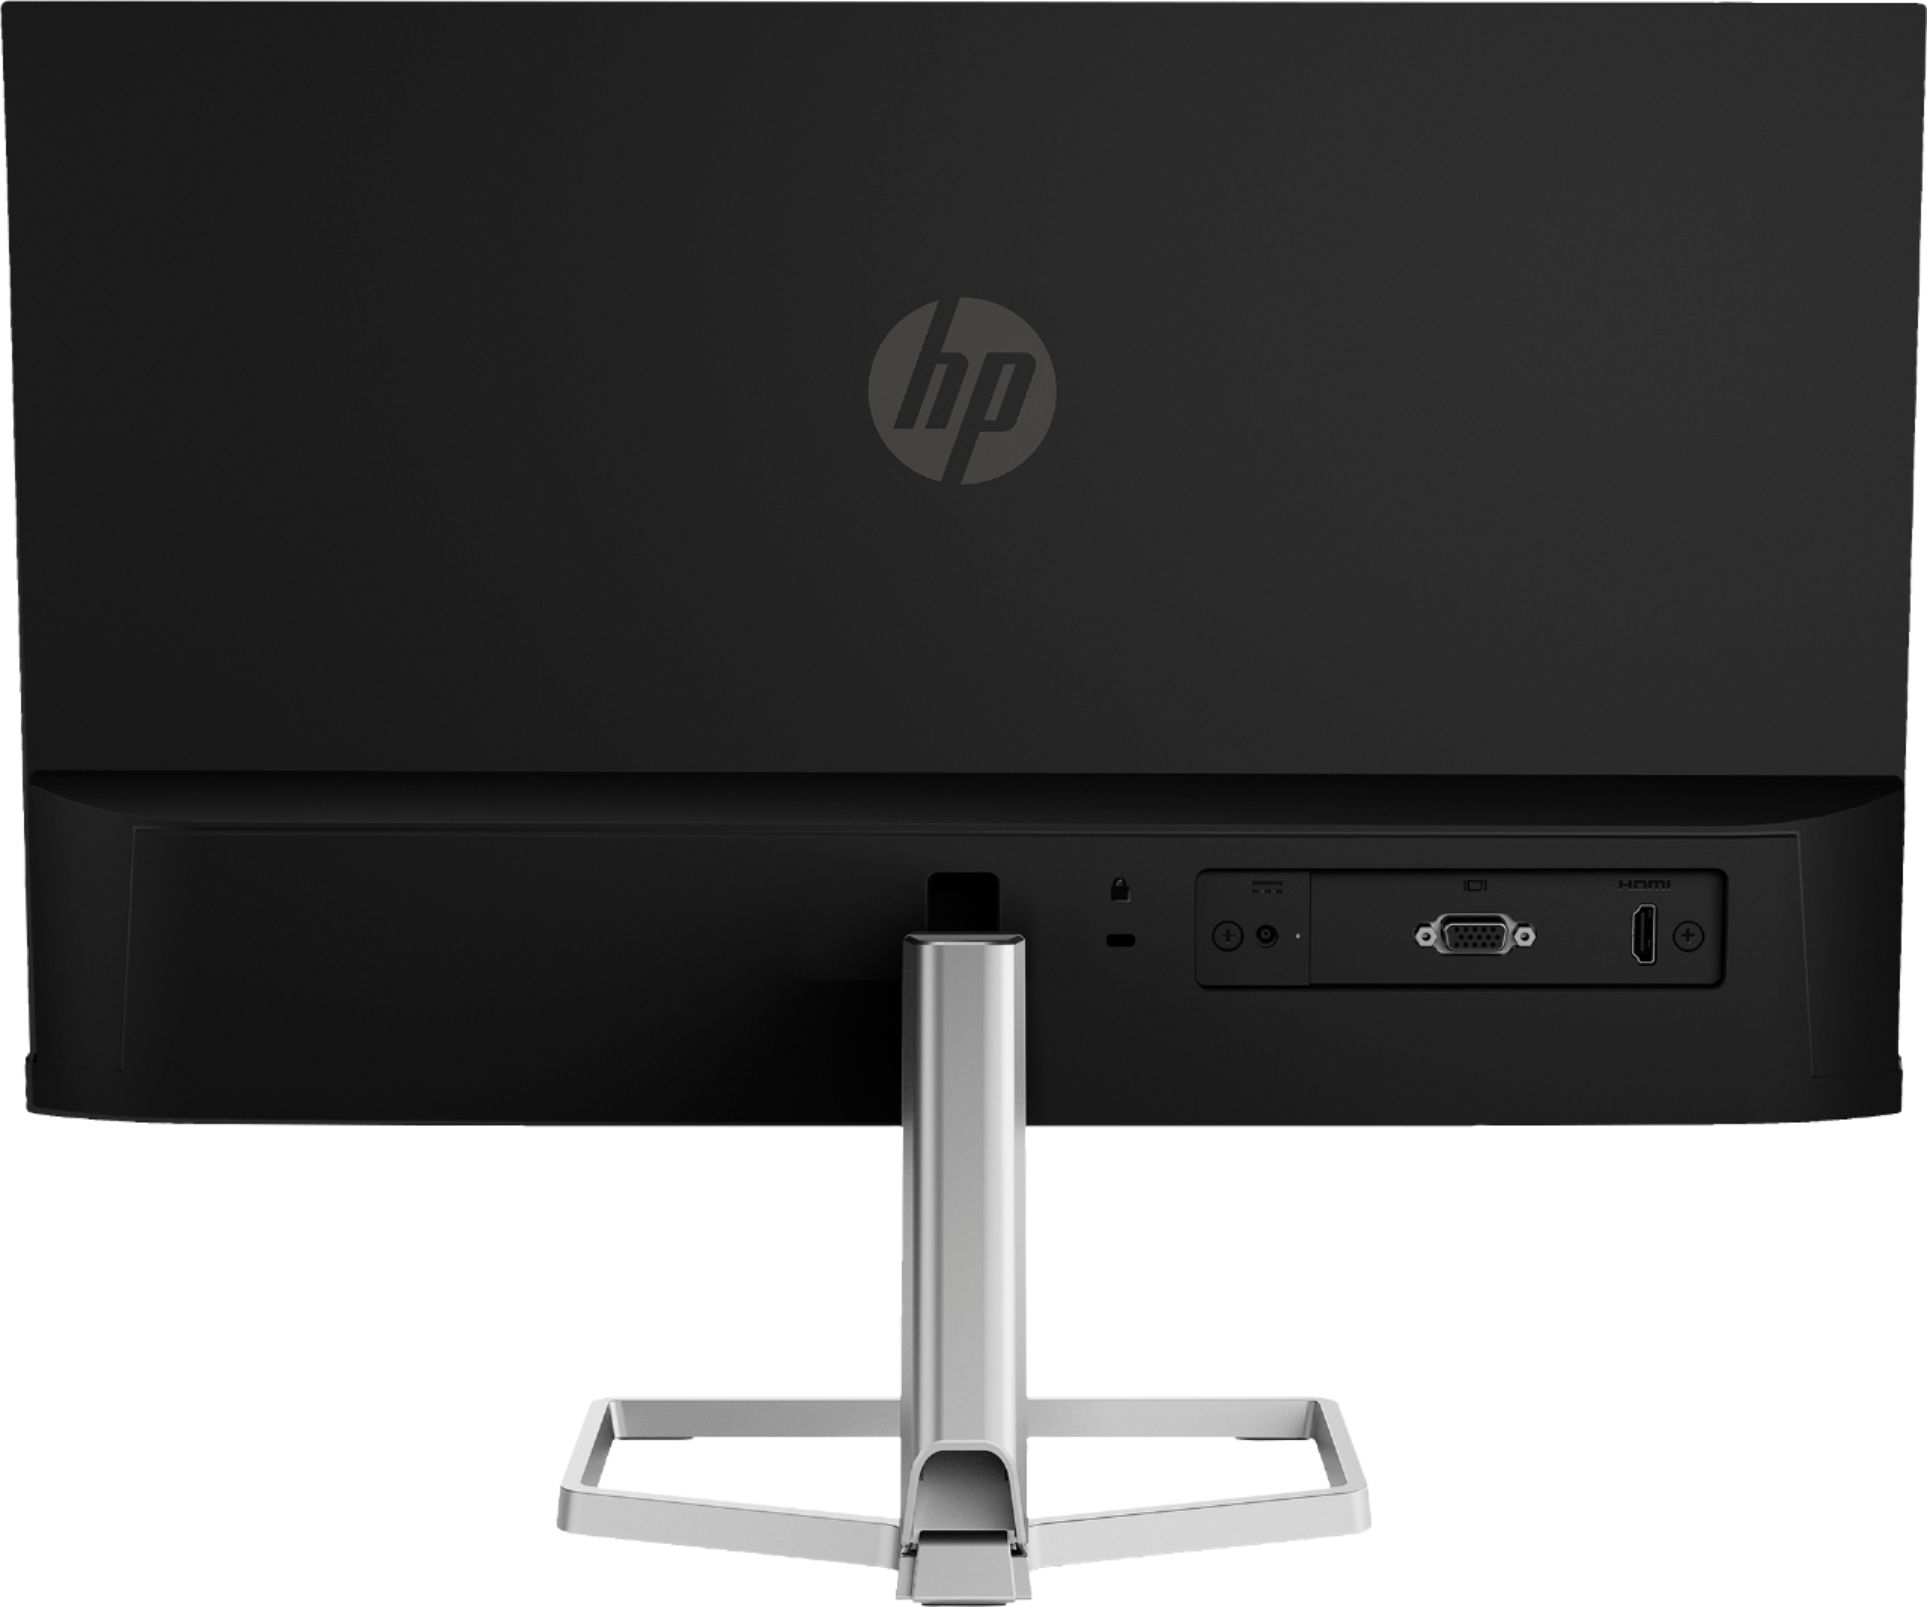 Back View: HP - Geek Squad Certified Refurbished 21.5" IPS LED FHD FreeSync Monitor - Silver & Black